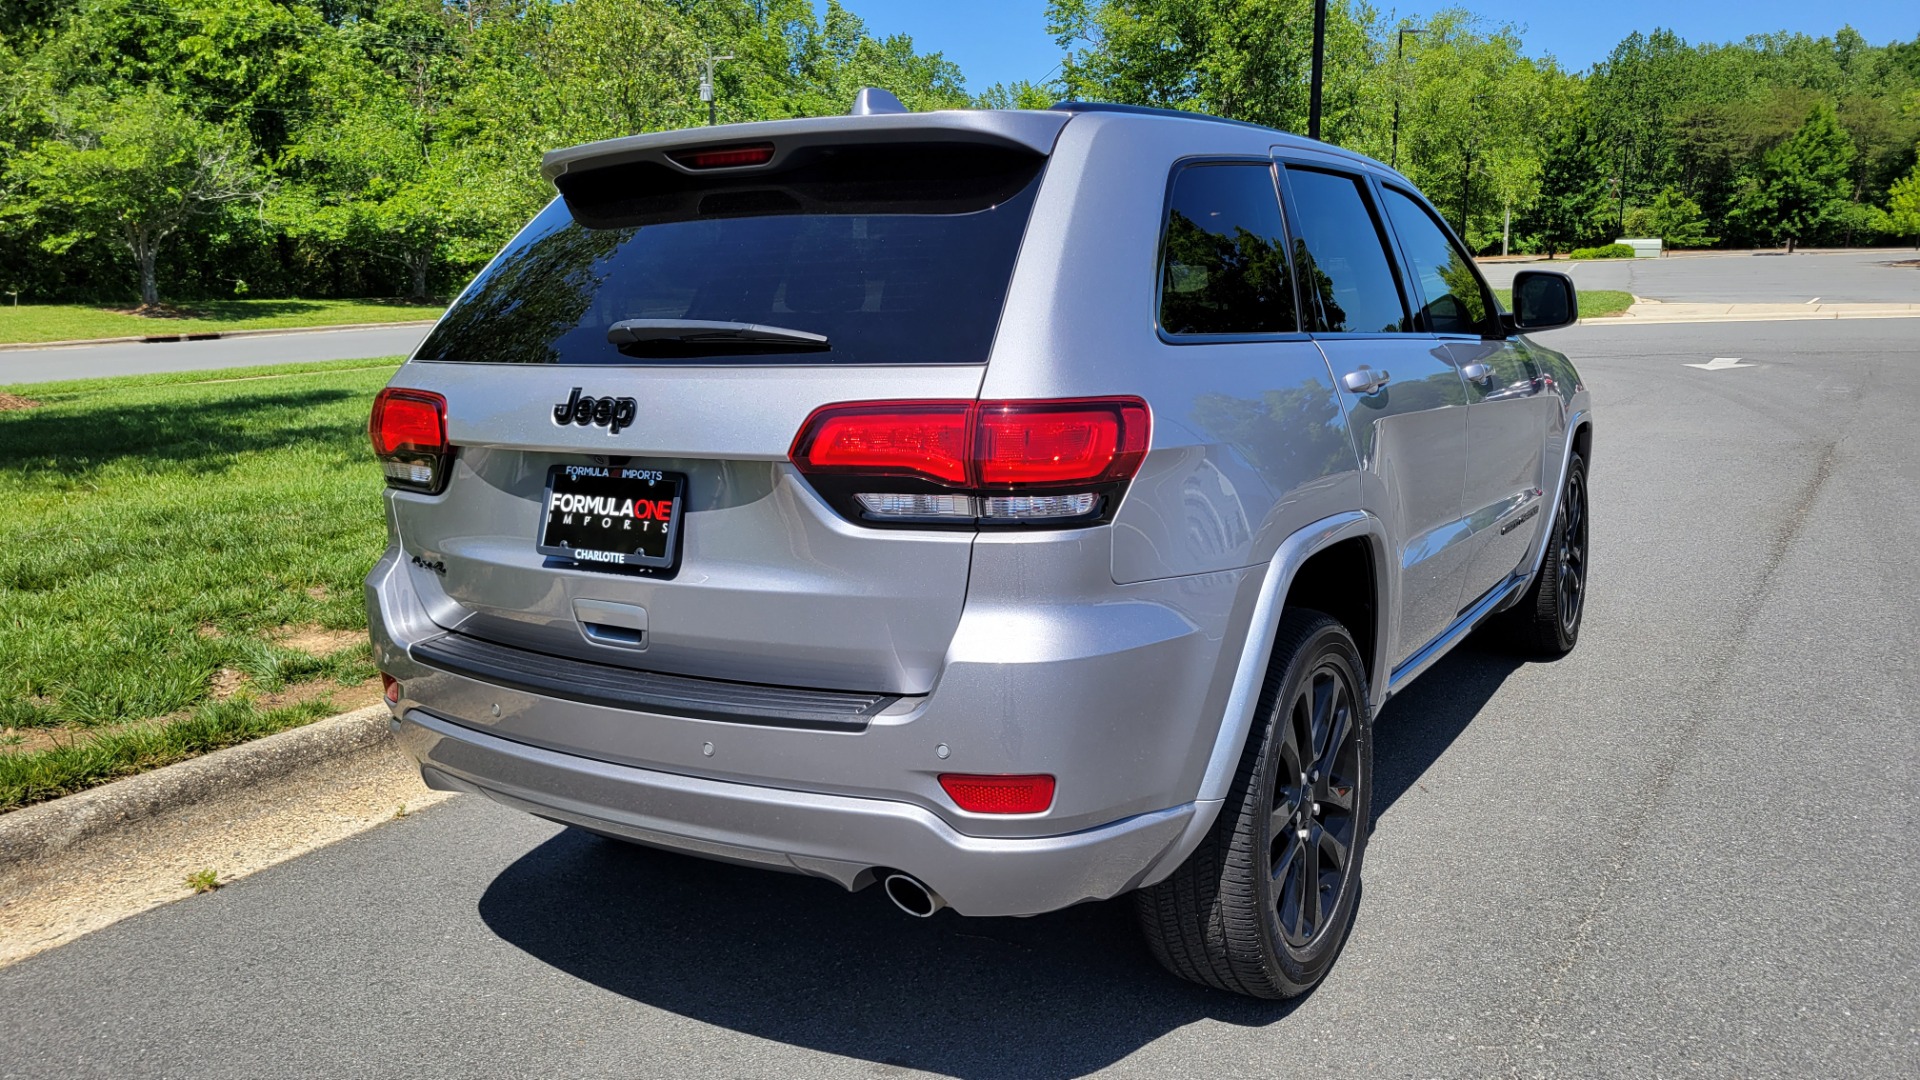 Used 2021 Jeep GRAND CHEROKEE LAREDO X / 3.6L / 4X4 / NAV / ALTITUDE PKG / LEATHER / REARVIEW for sale $37,995 at Formula Imports in Charlotte NC 28227 9